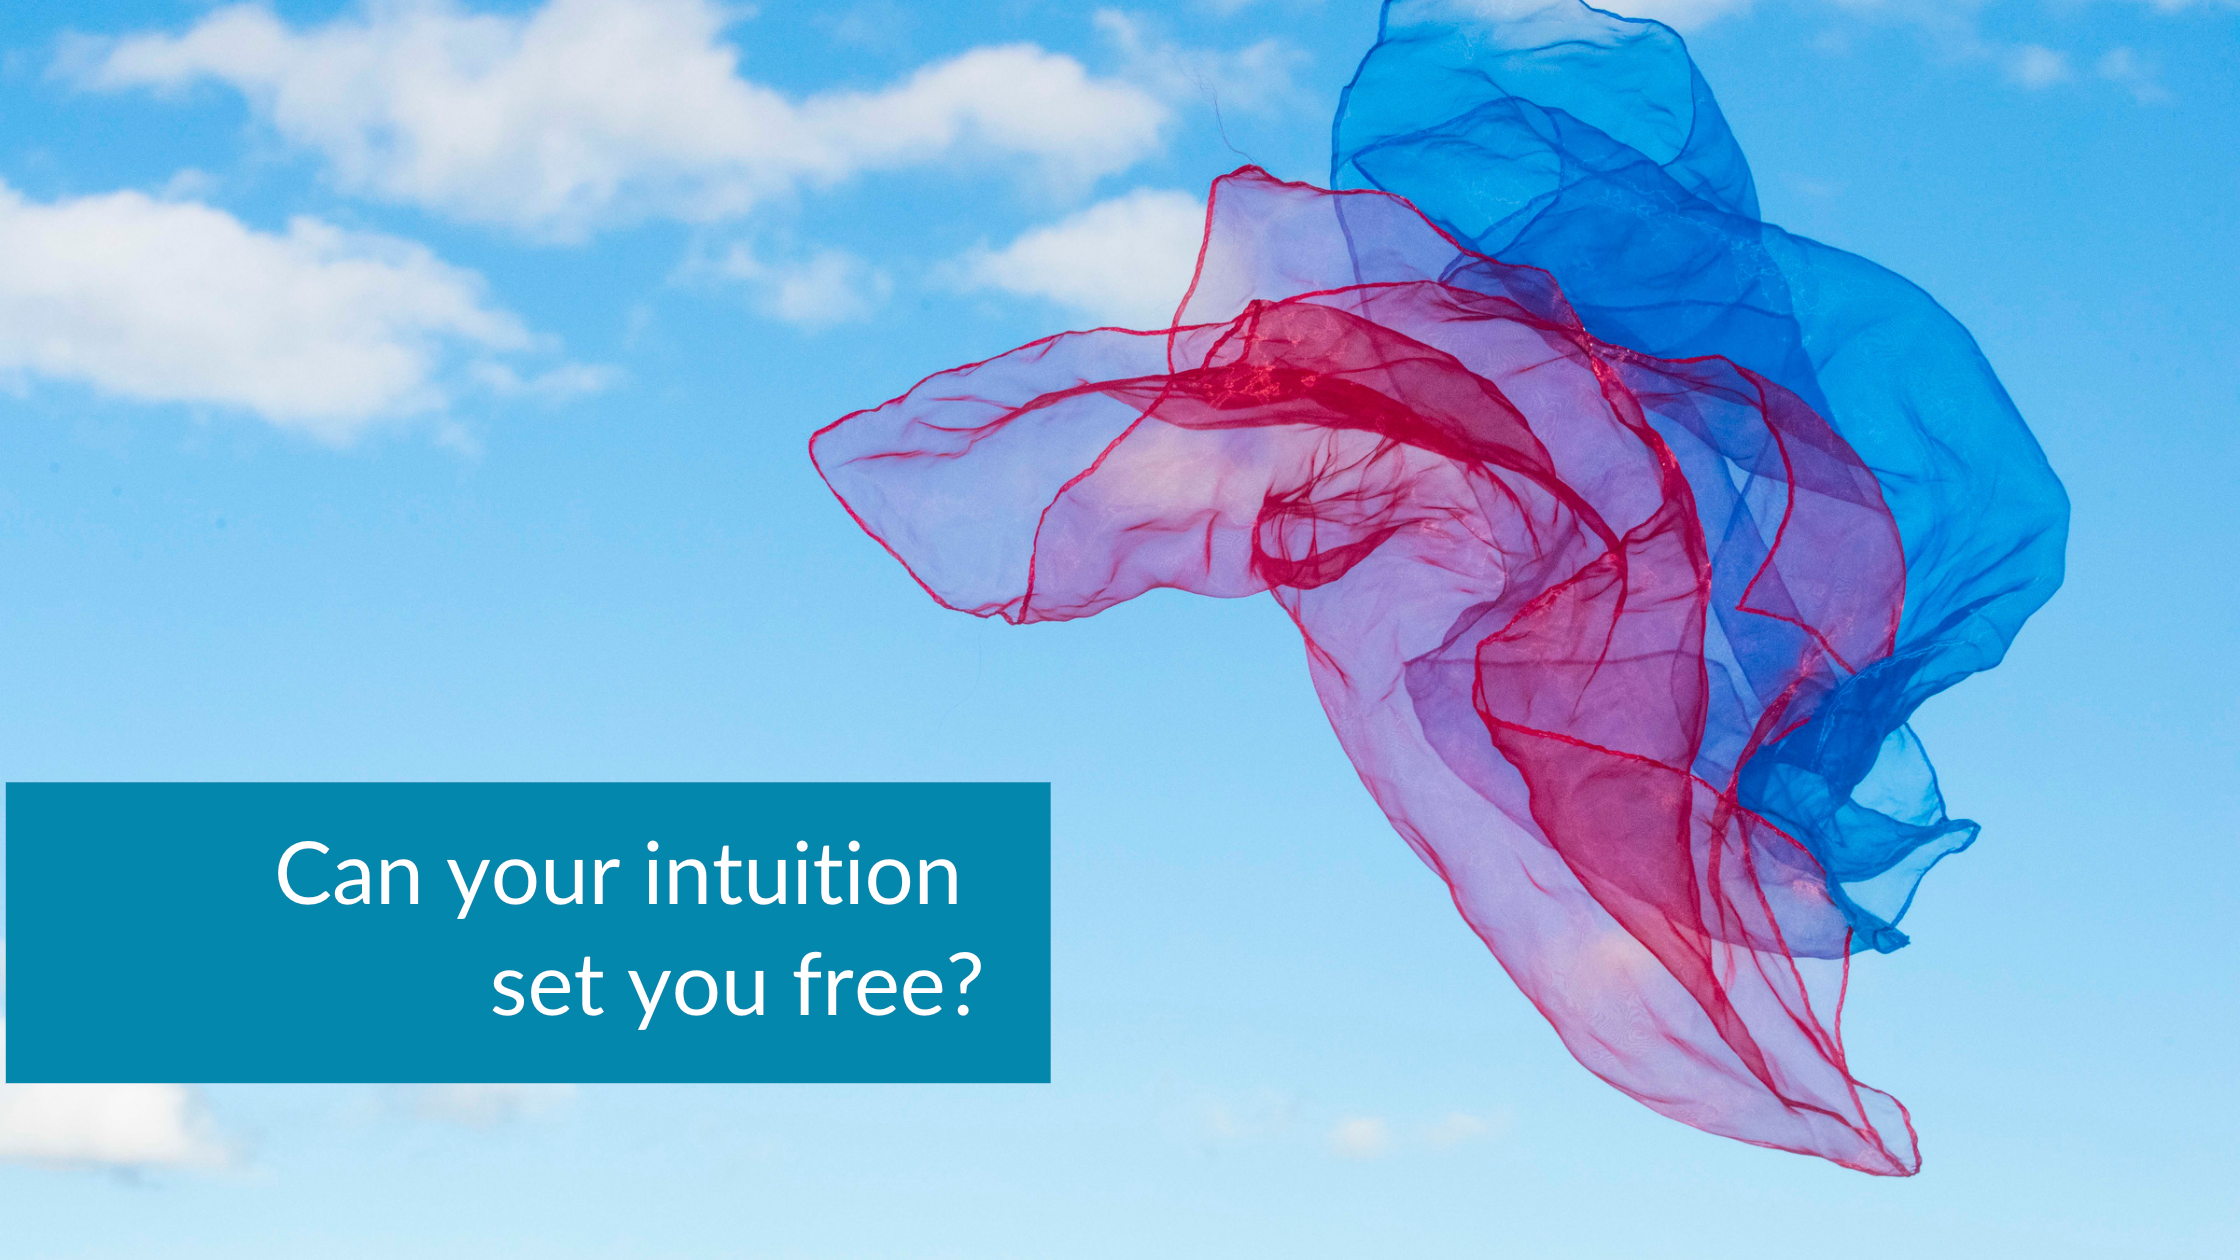 When you hear the word INTUITION, what does that mean to you?